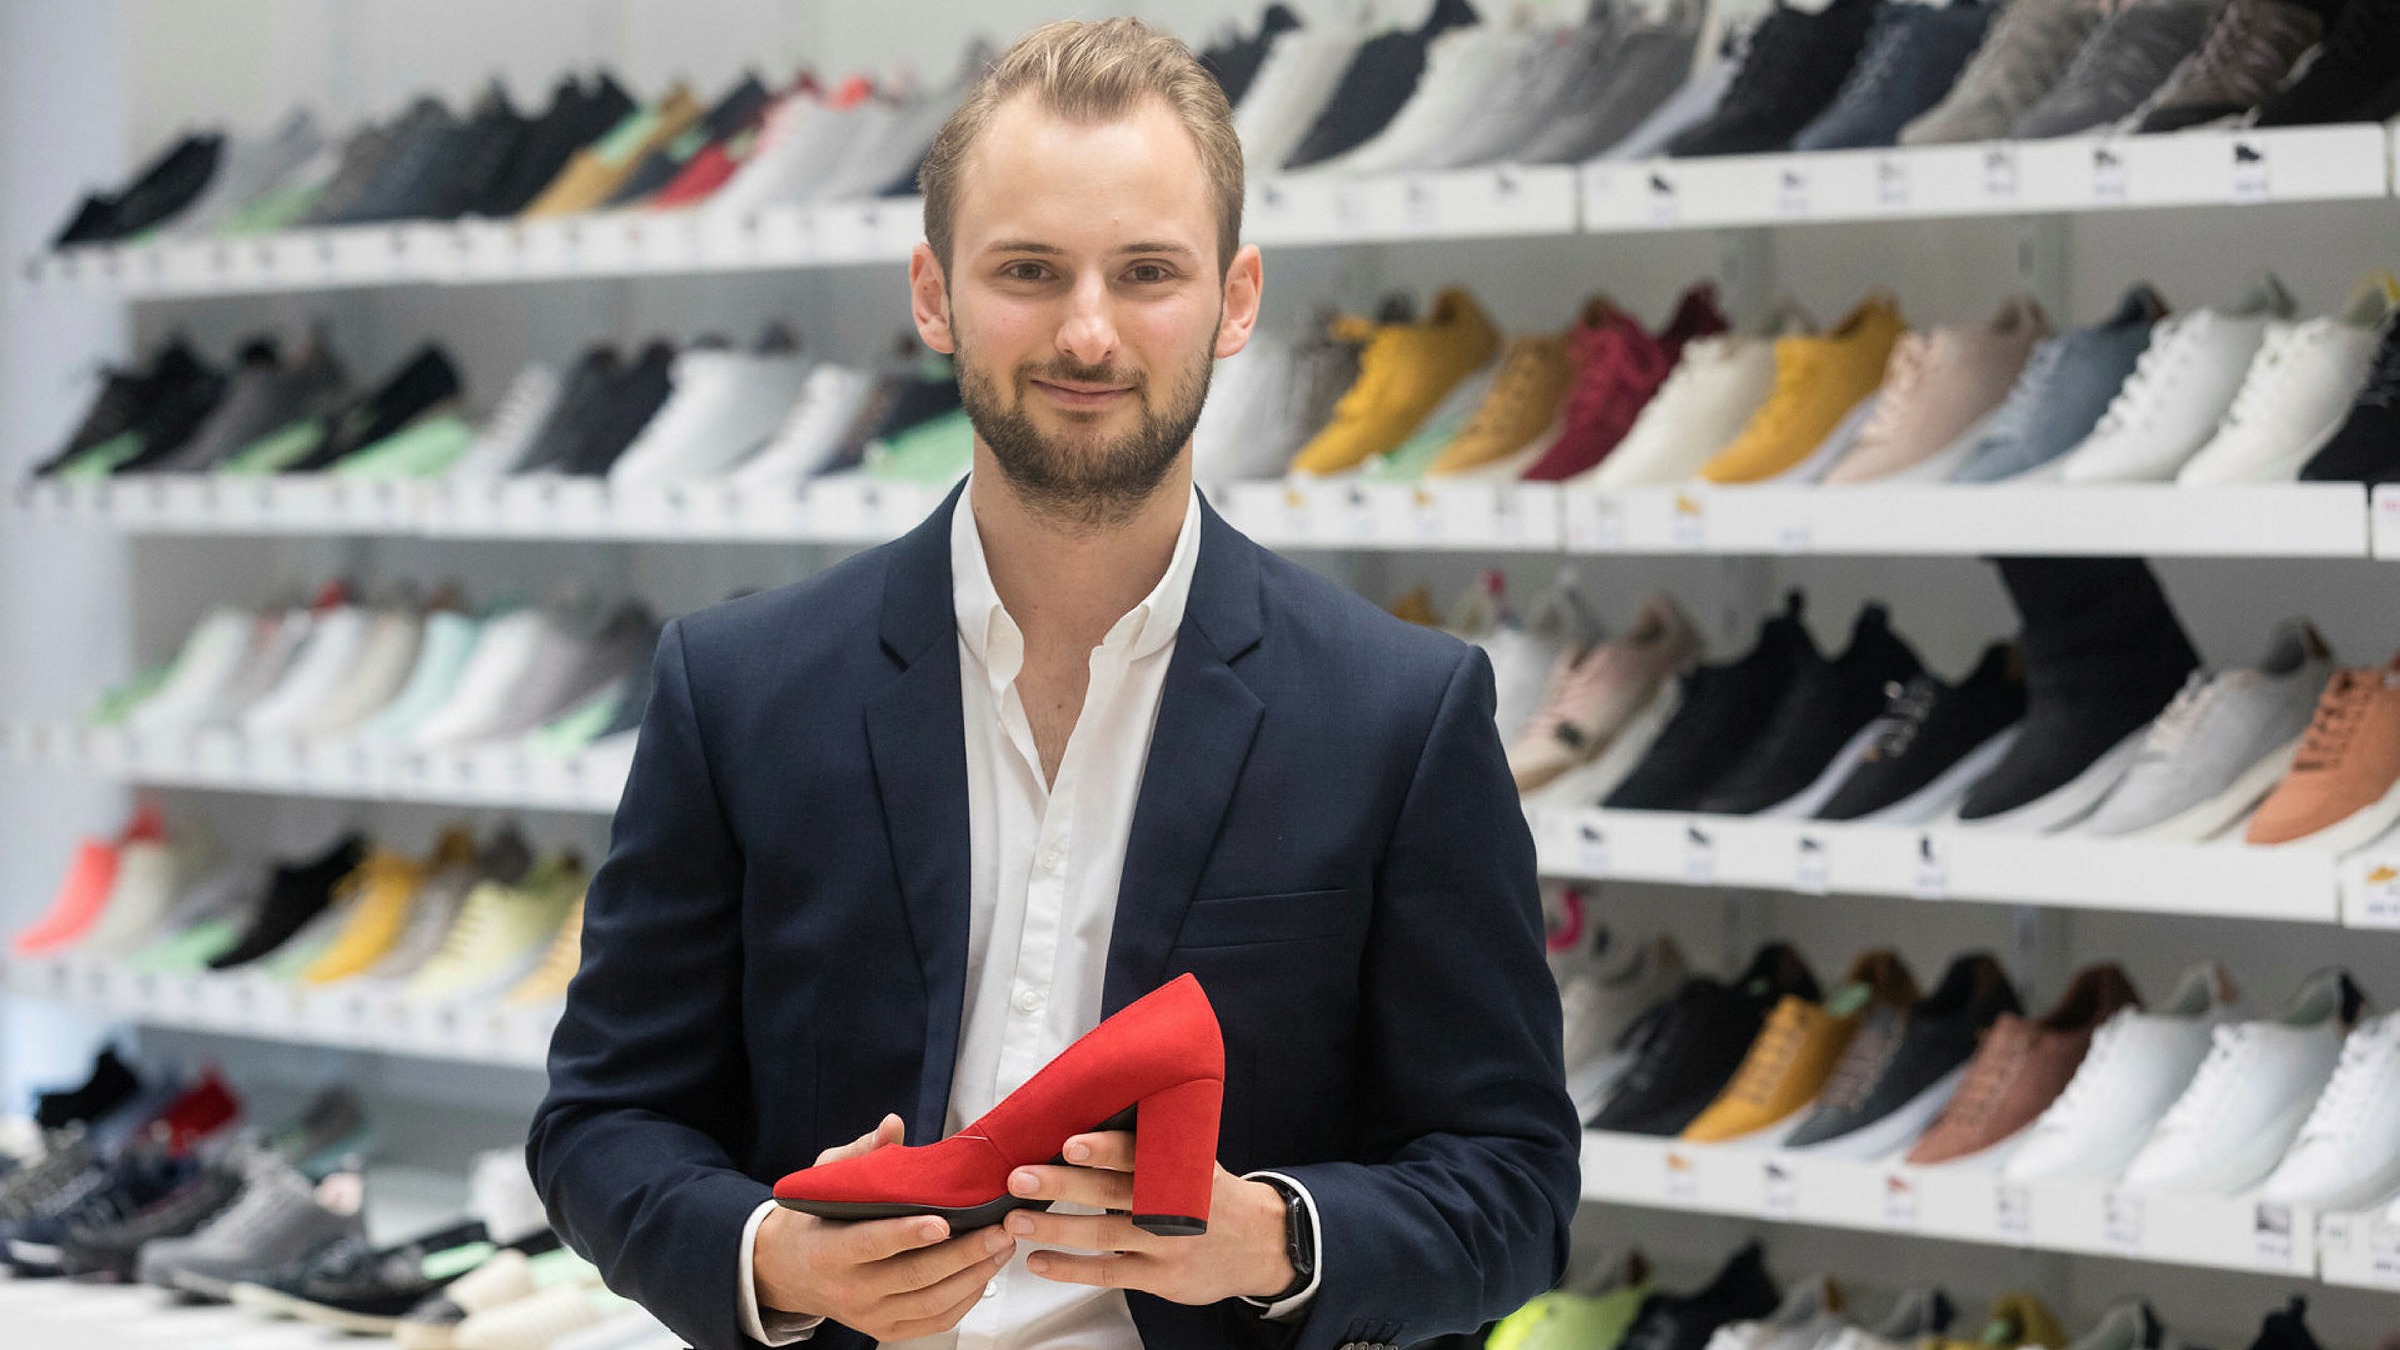 Manage Abandoned wave Europe's biggest shoe shop chain looks to expand in UK | Financial Times